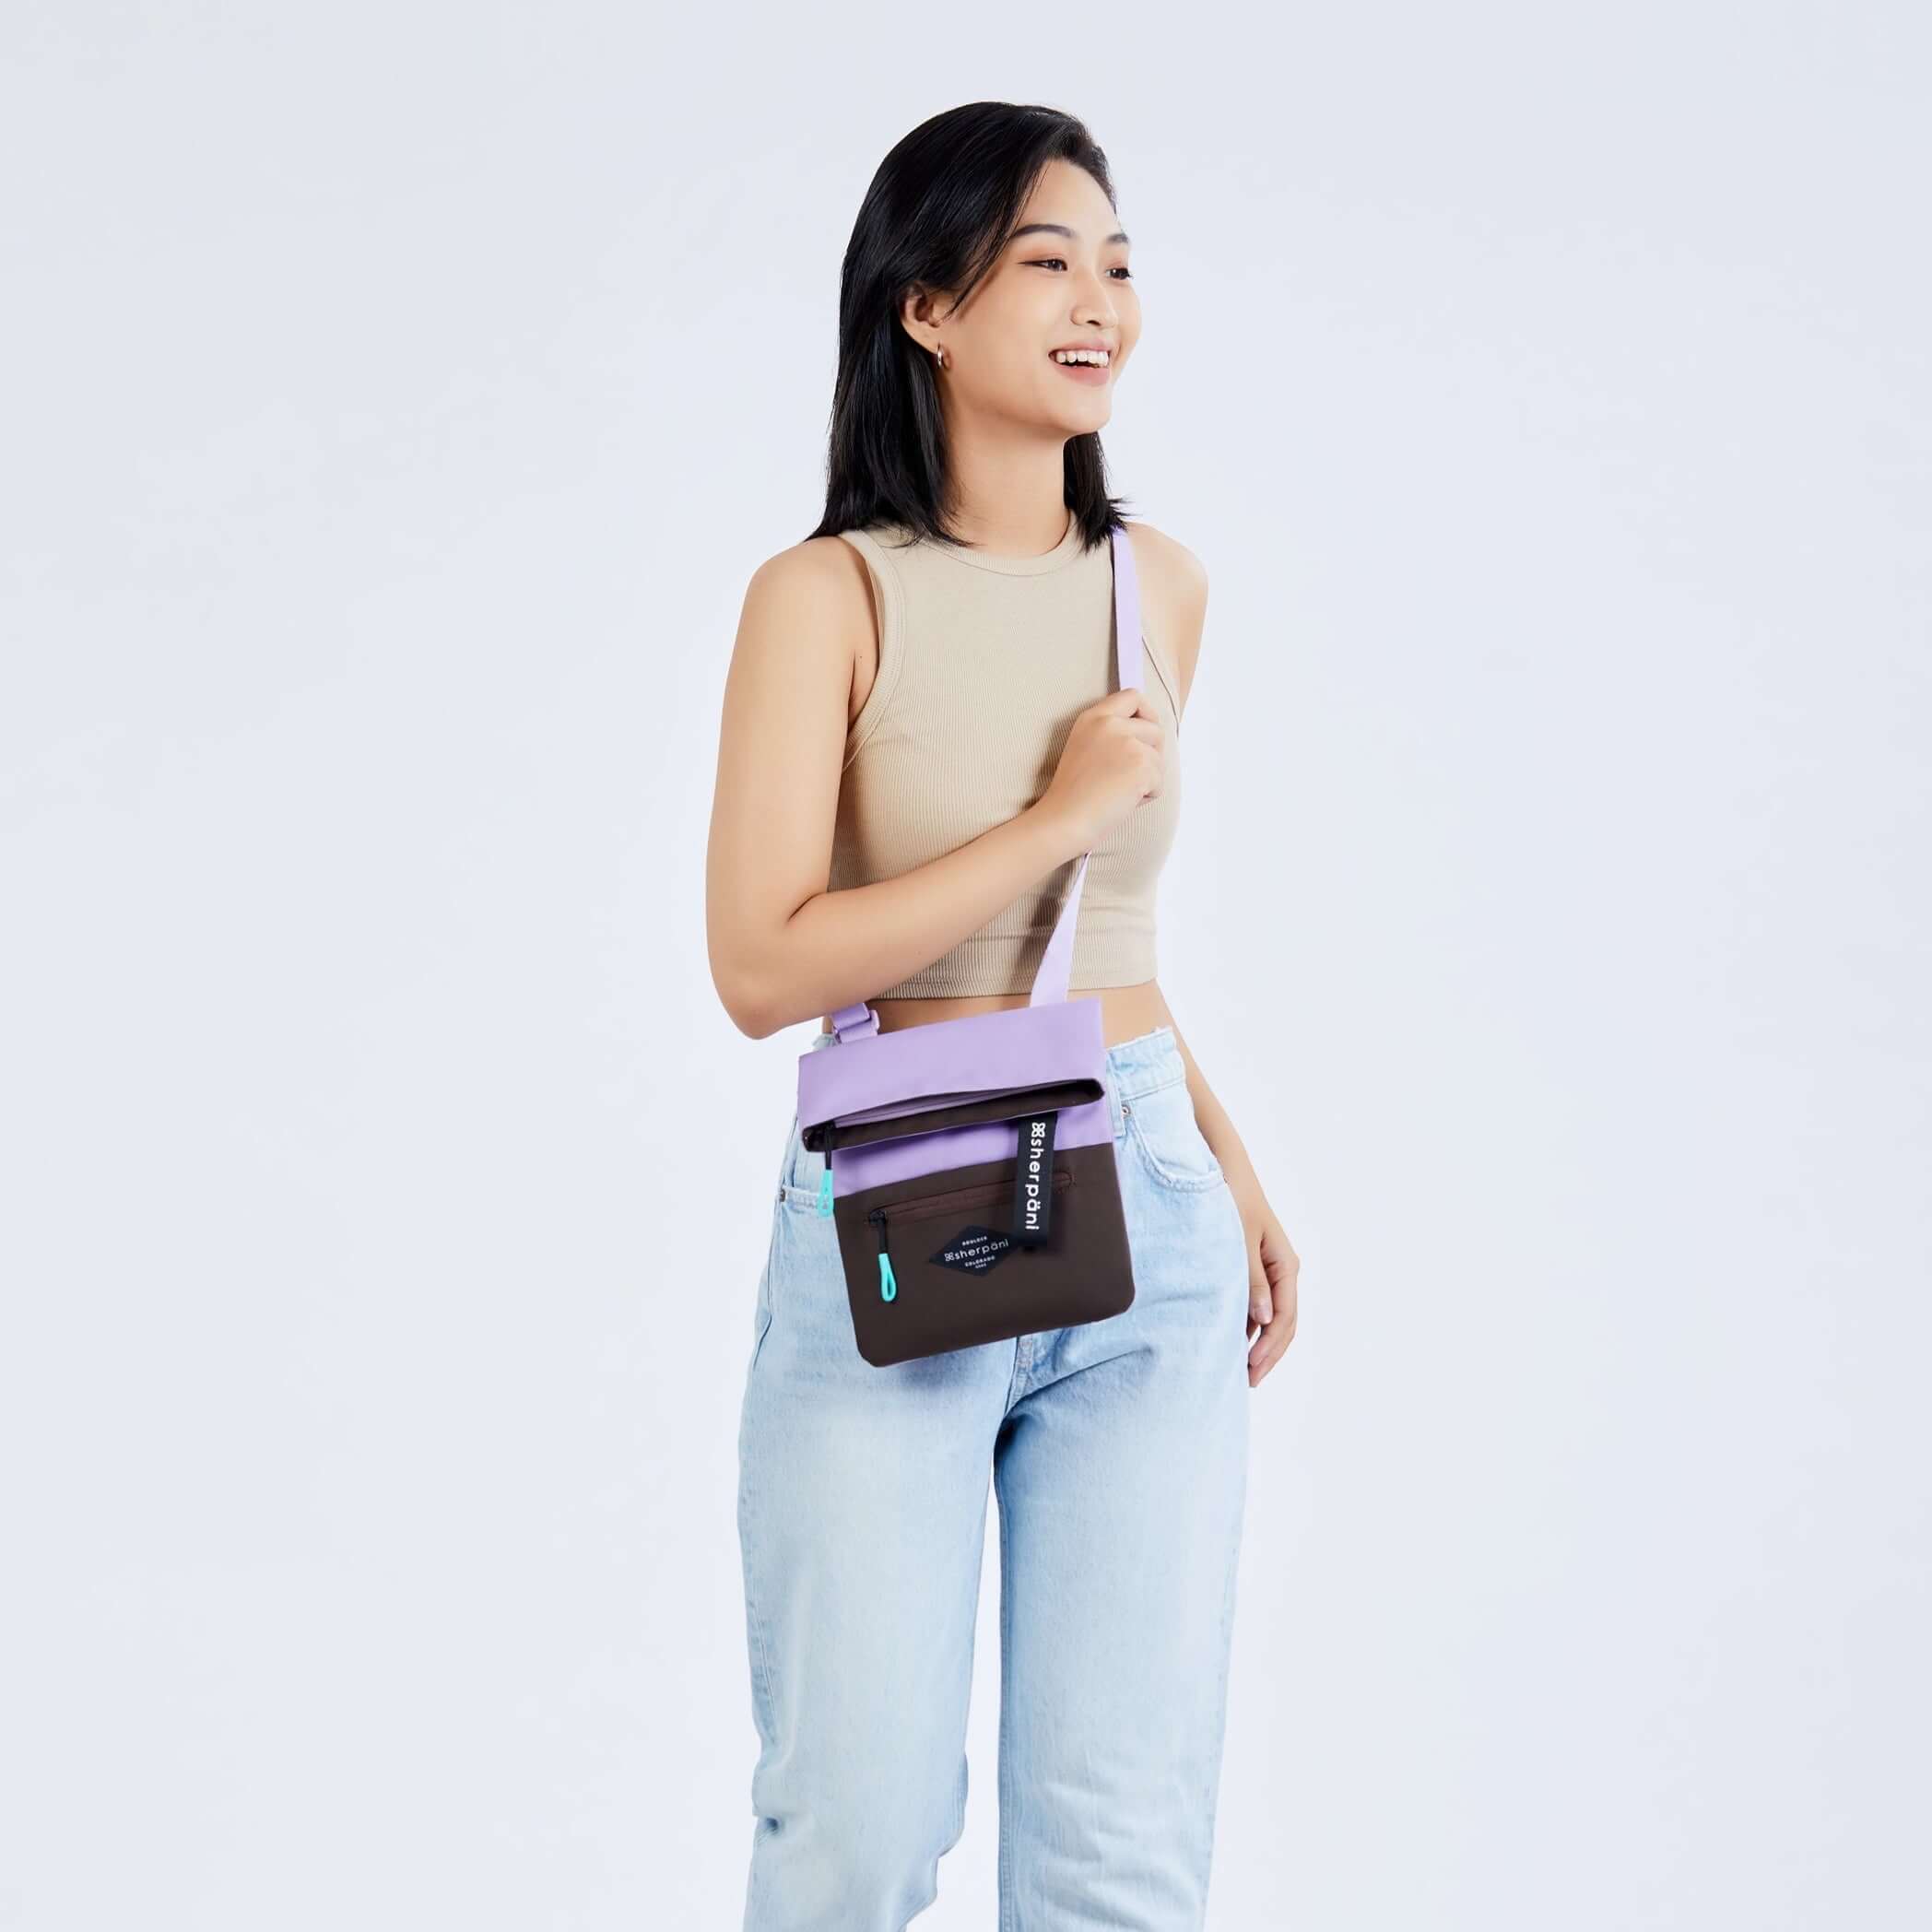 Full body view of a dark haired model facing the camera and smiling to the side. She is wearing a tan crop top, jeans and white sneakers. She carries Sherpani crossbody, the Pica in lavender, as a crossbody.